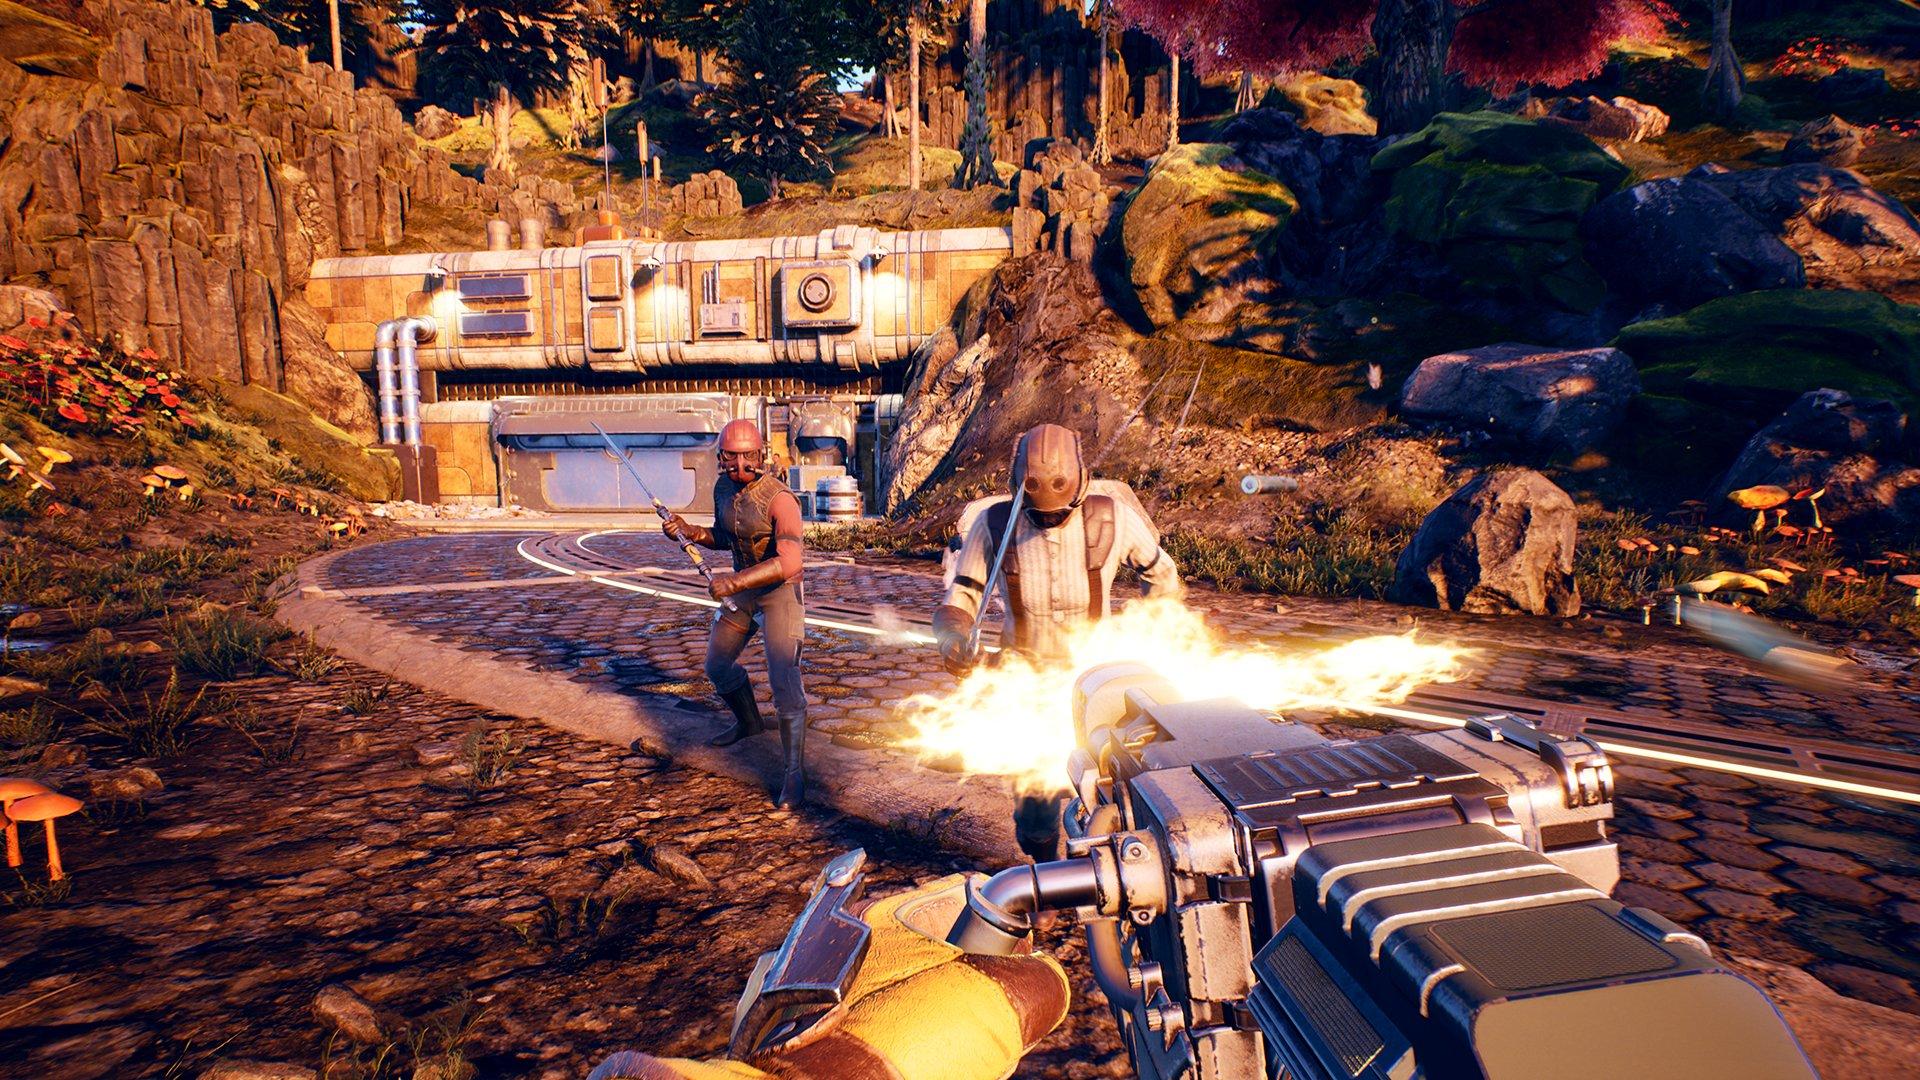 outer worlds ps4